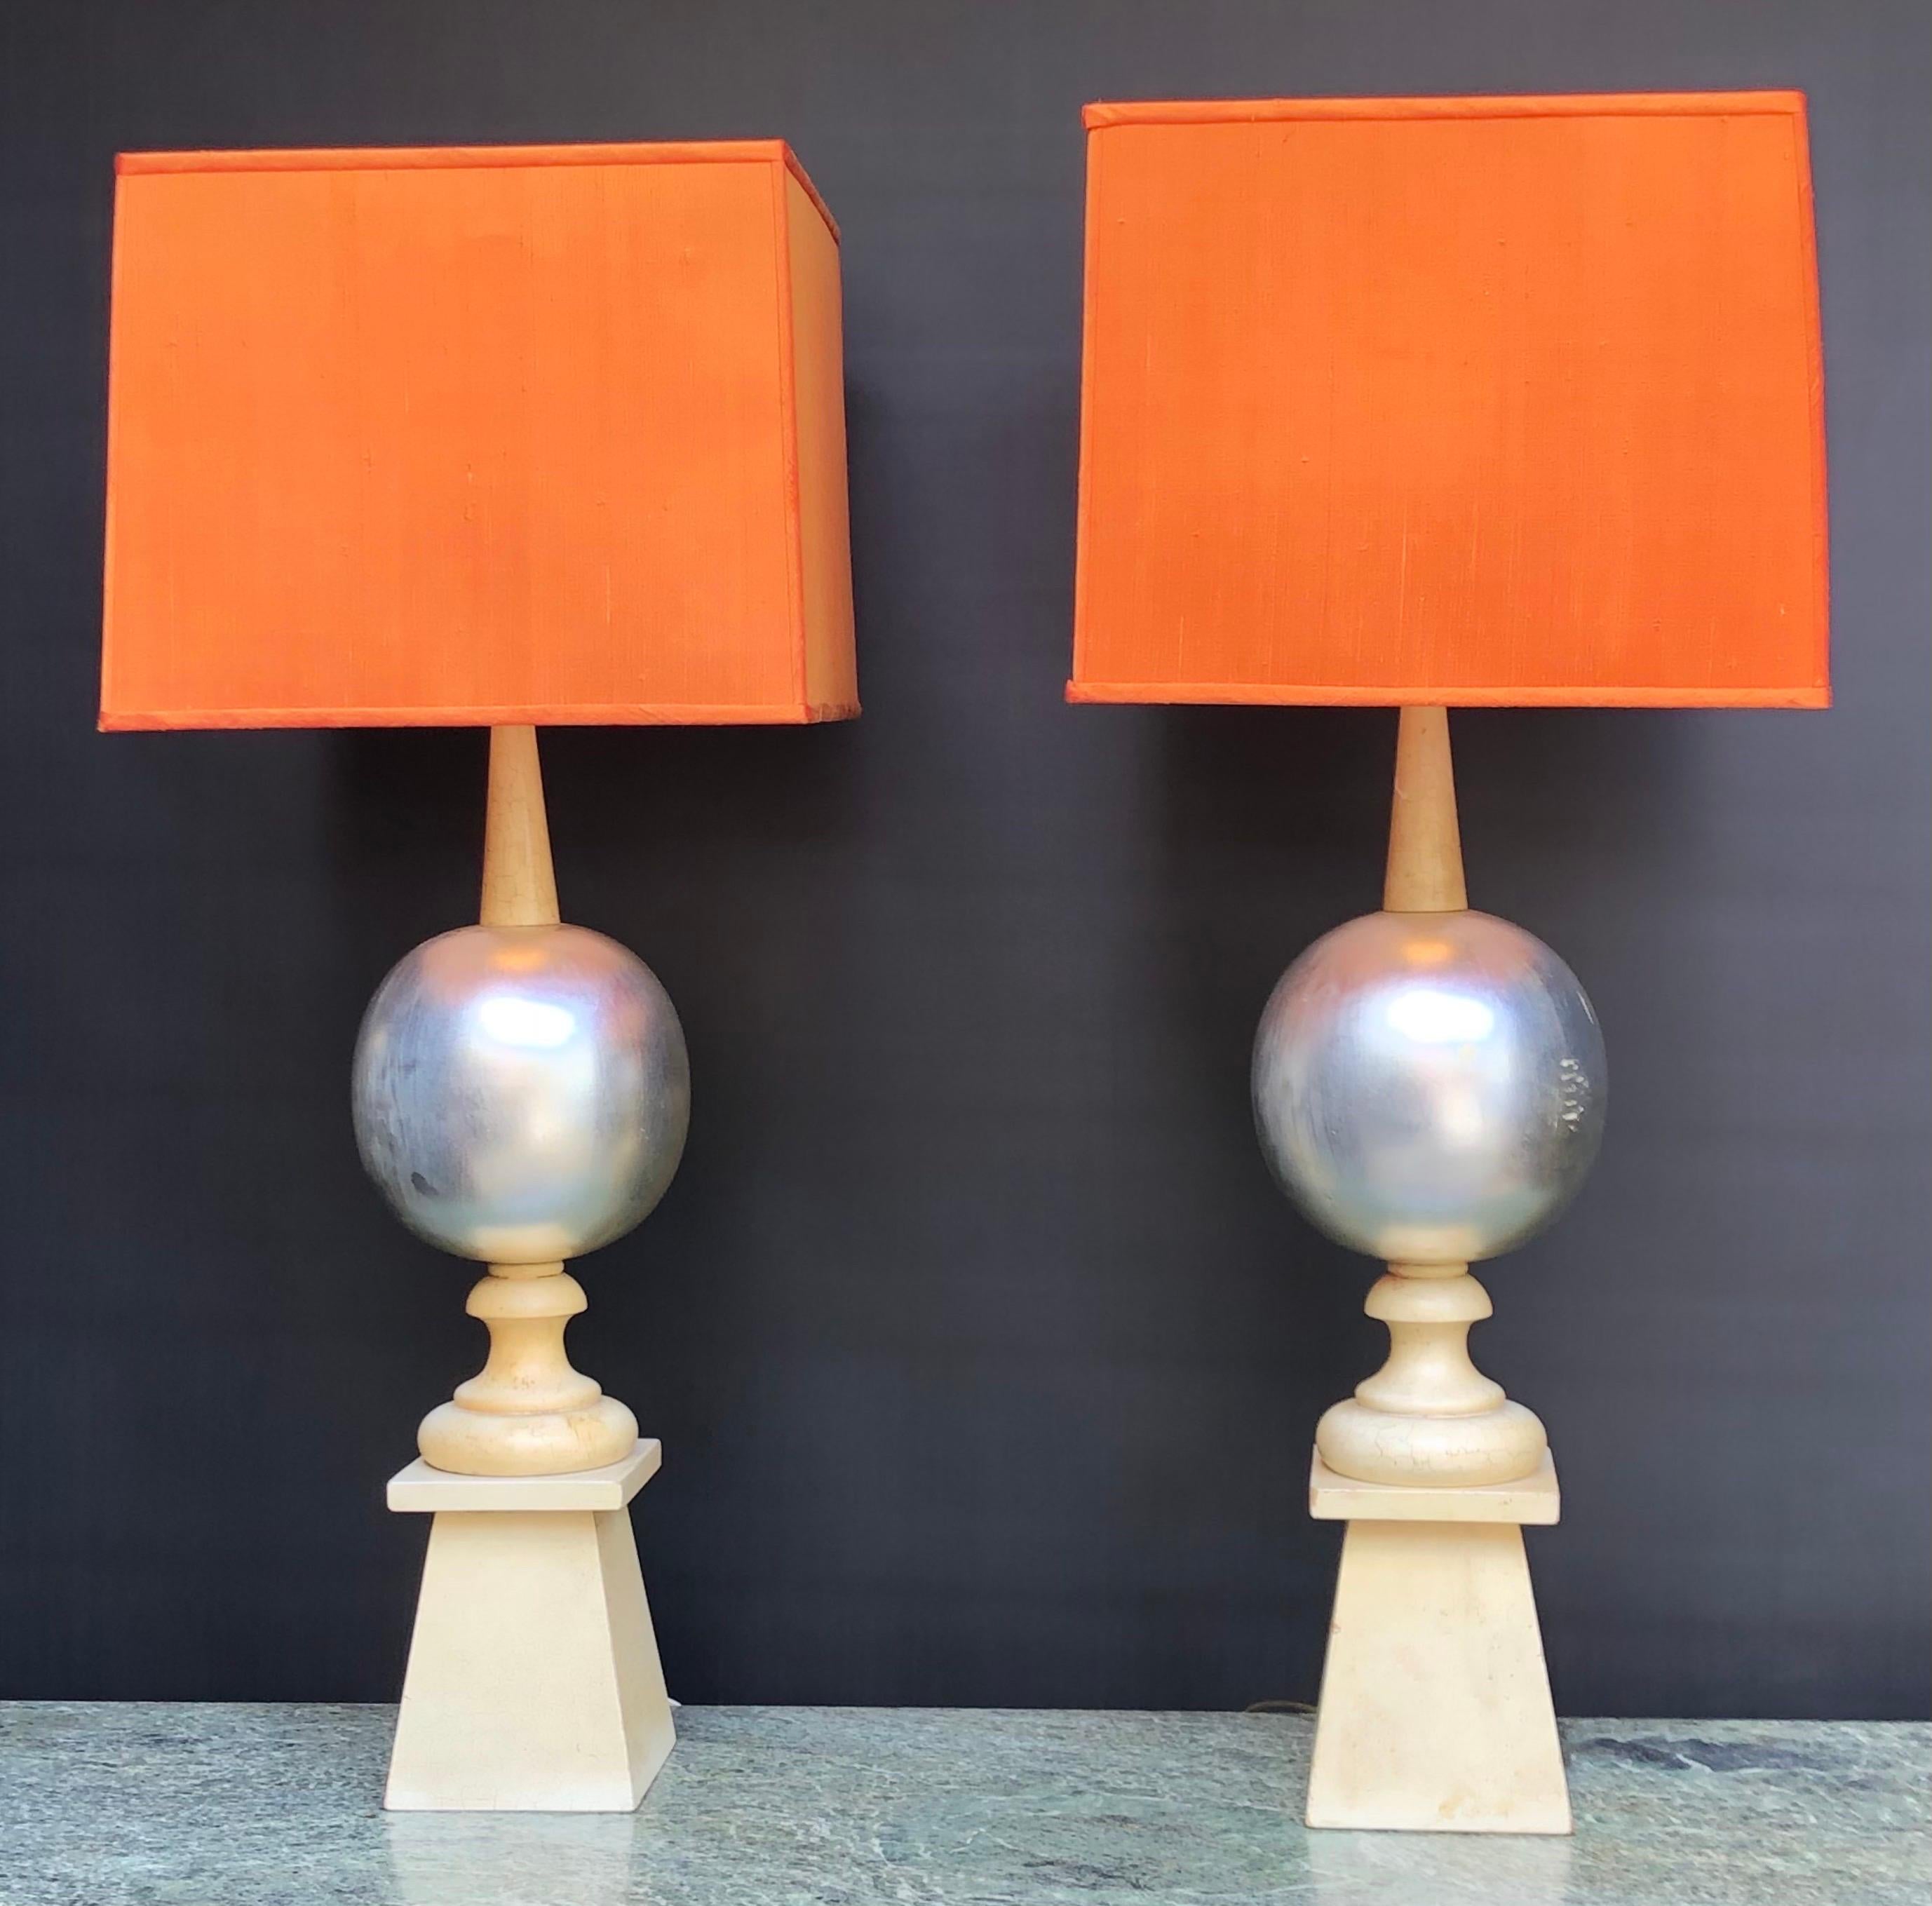 An elegant pair of Mid-Century Hollywood Regence Cream Lacquered & Silver Leafed Wood Spire Lamps By James Mont.  The Regal James Mont Lamps have Exotic Caribbean Coral Color square lampshade resting on the original Milk-glass reverse cone Light